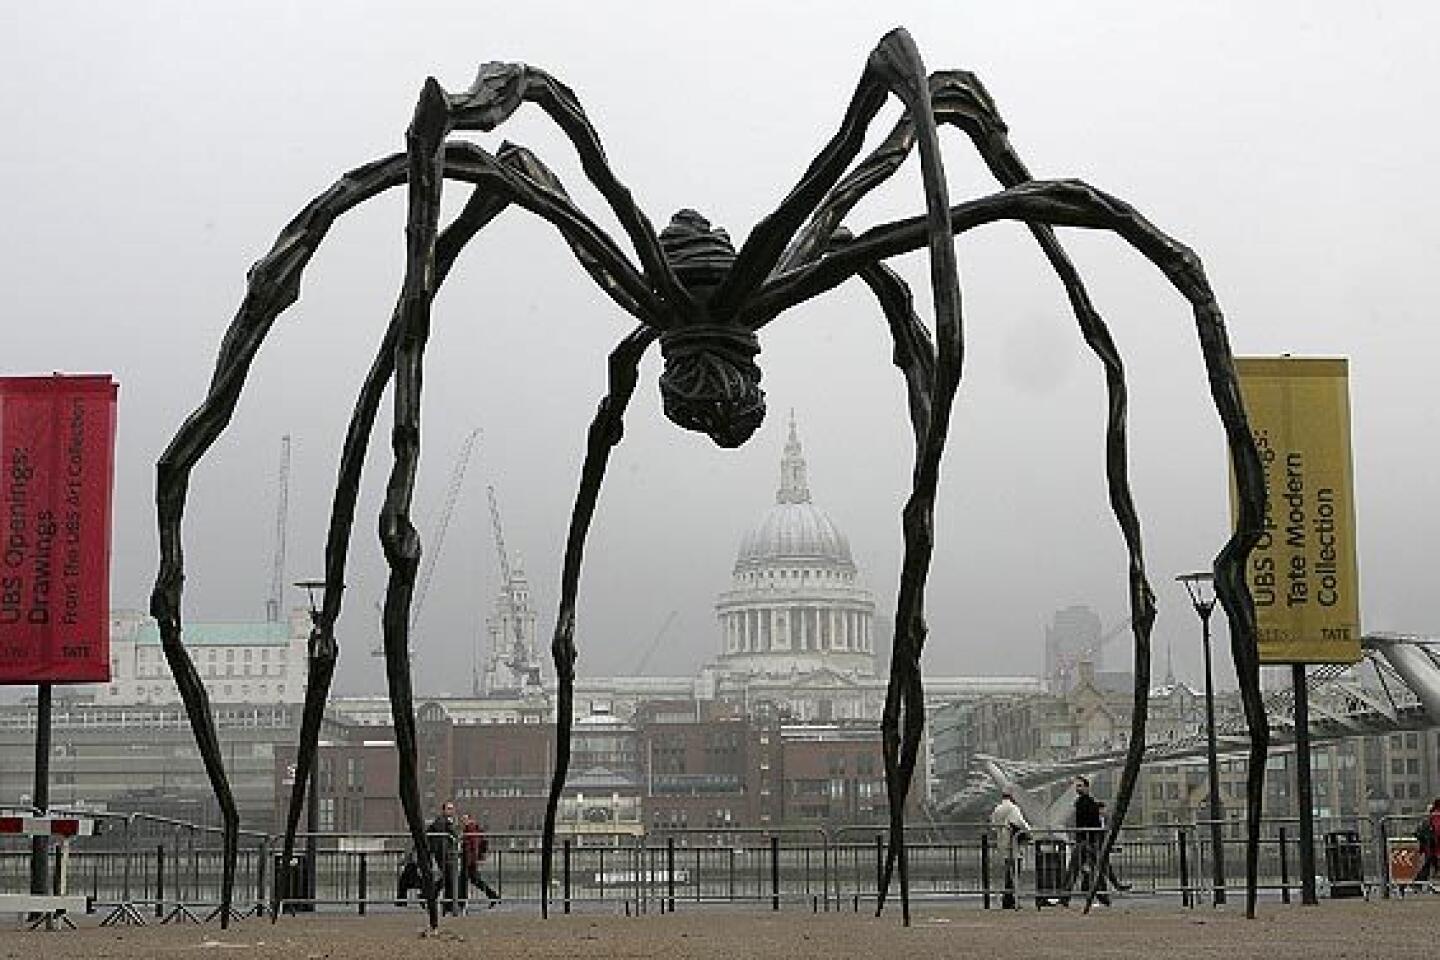 The Art and Life of Louise Bourgeois: Robert Storr